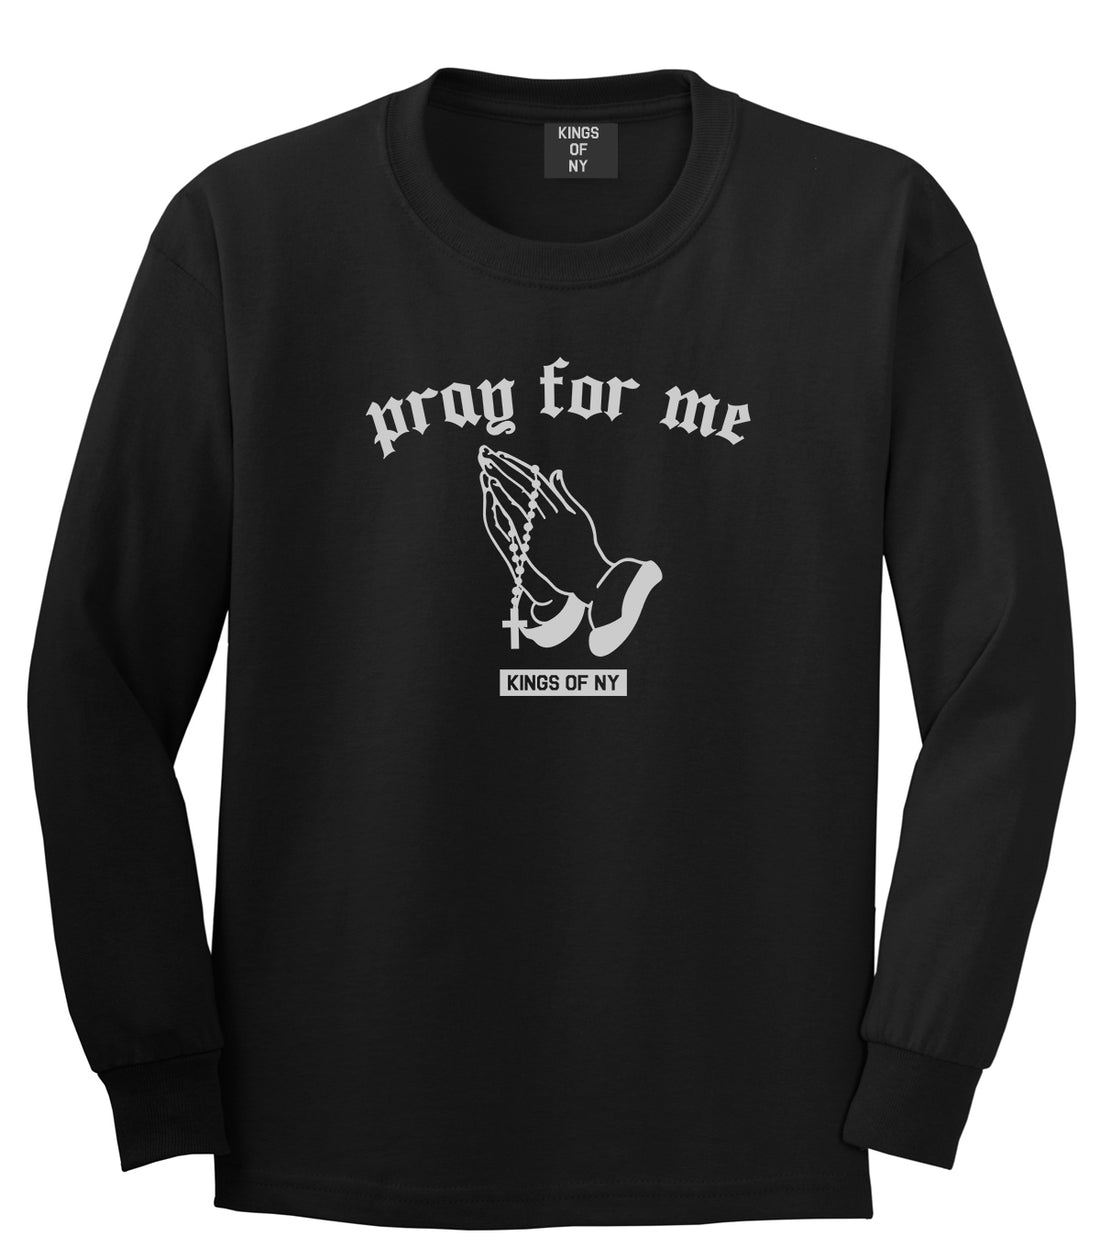 Pray For Me Mens Long Sleeve T-Shirt Black by Kings Of NY